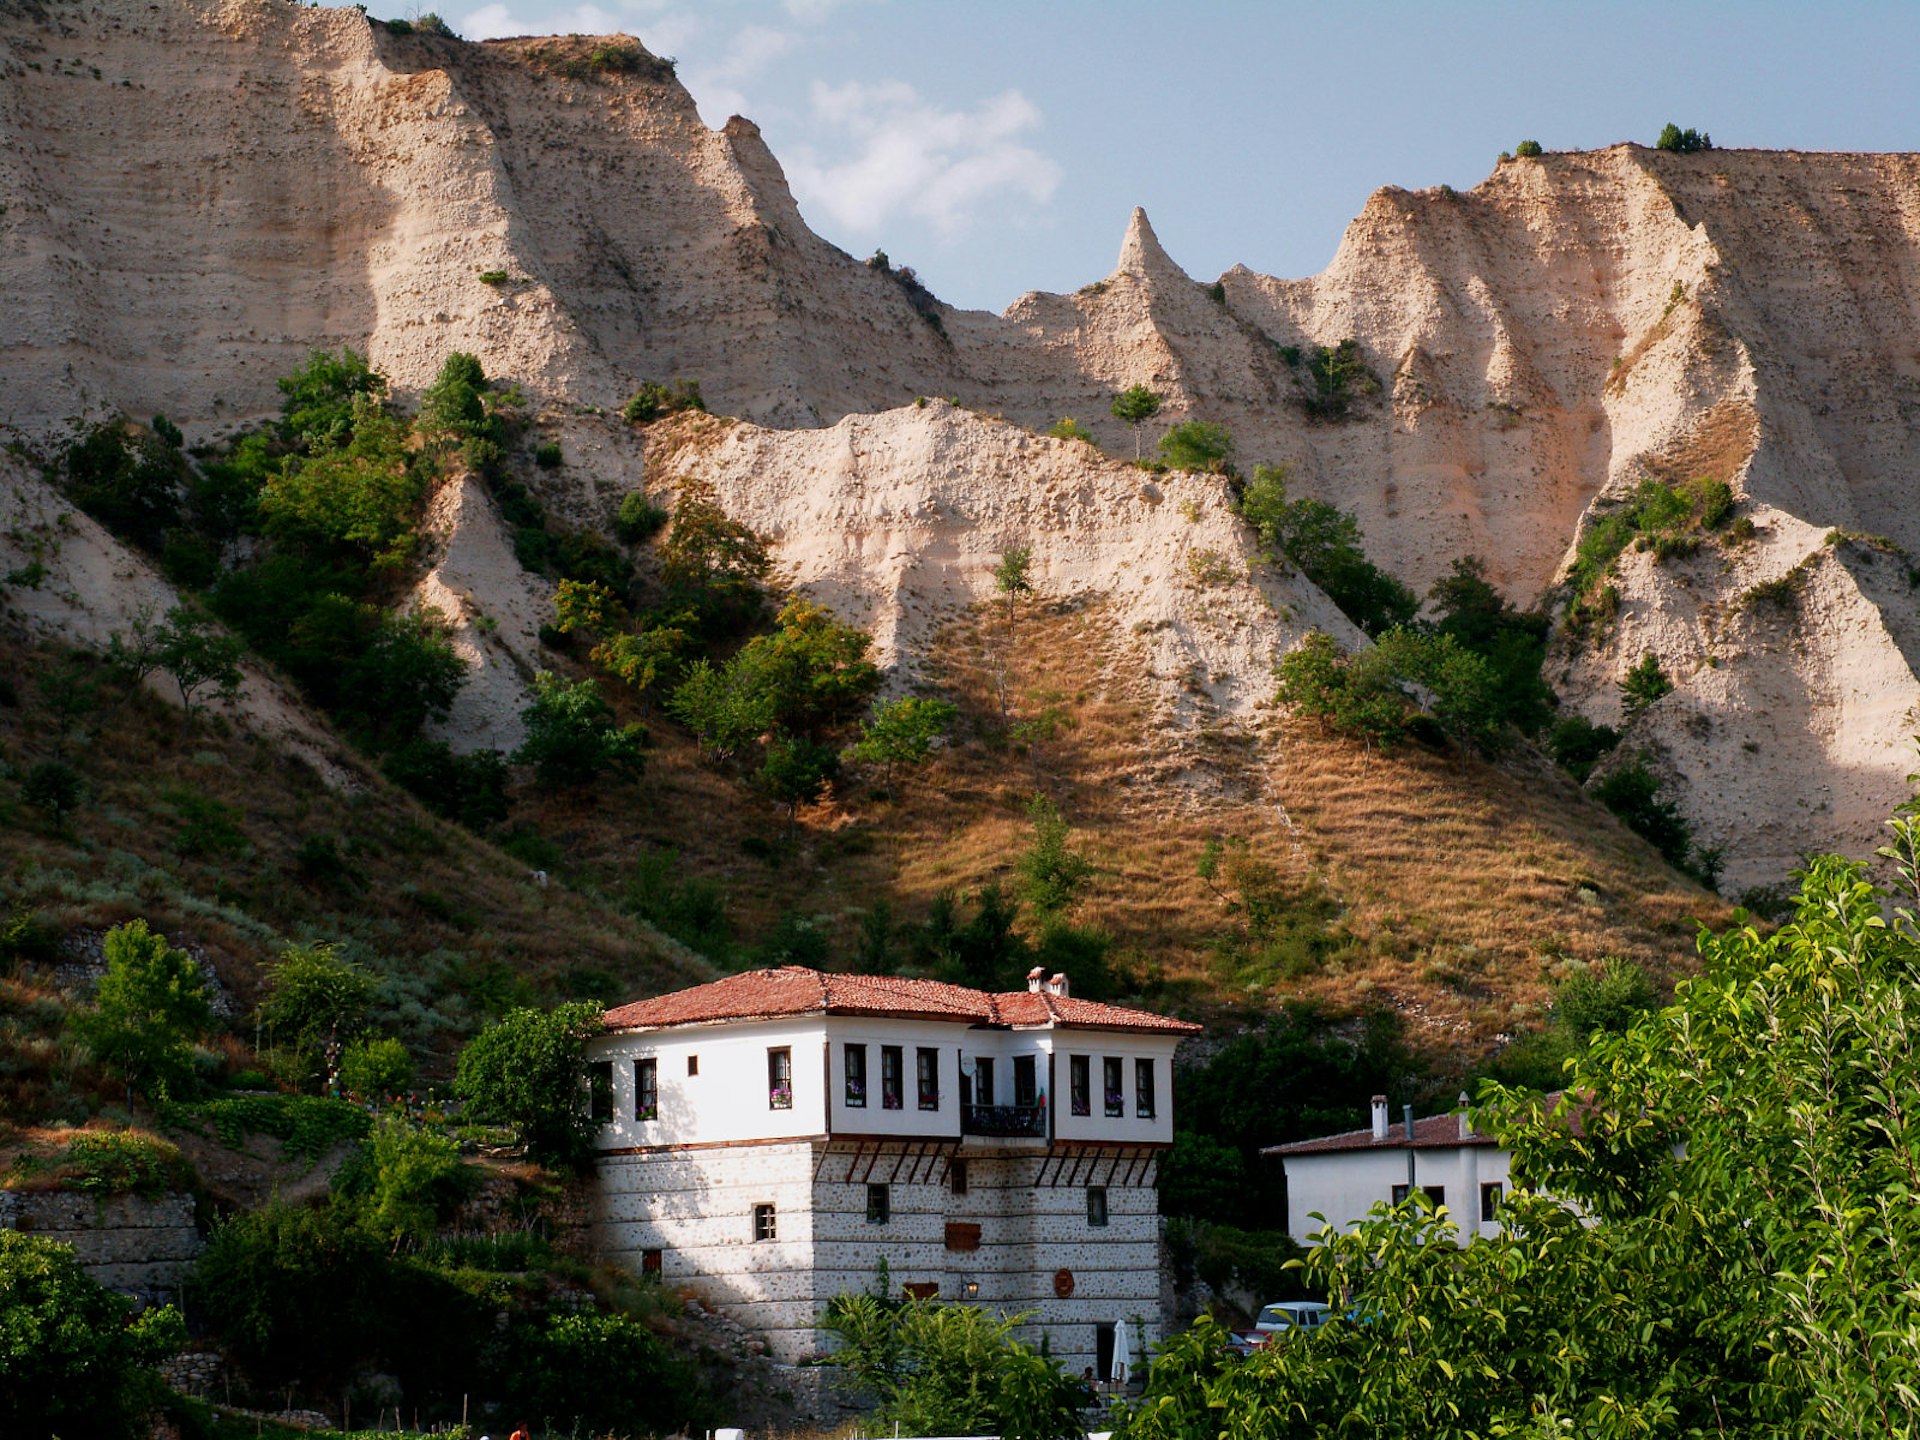 Sandstone pyramids rising over Melnik’s traditional houses 